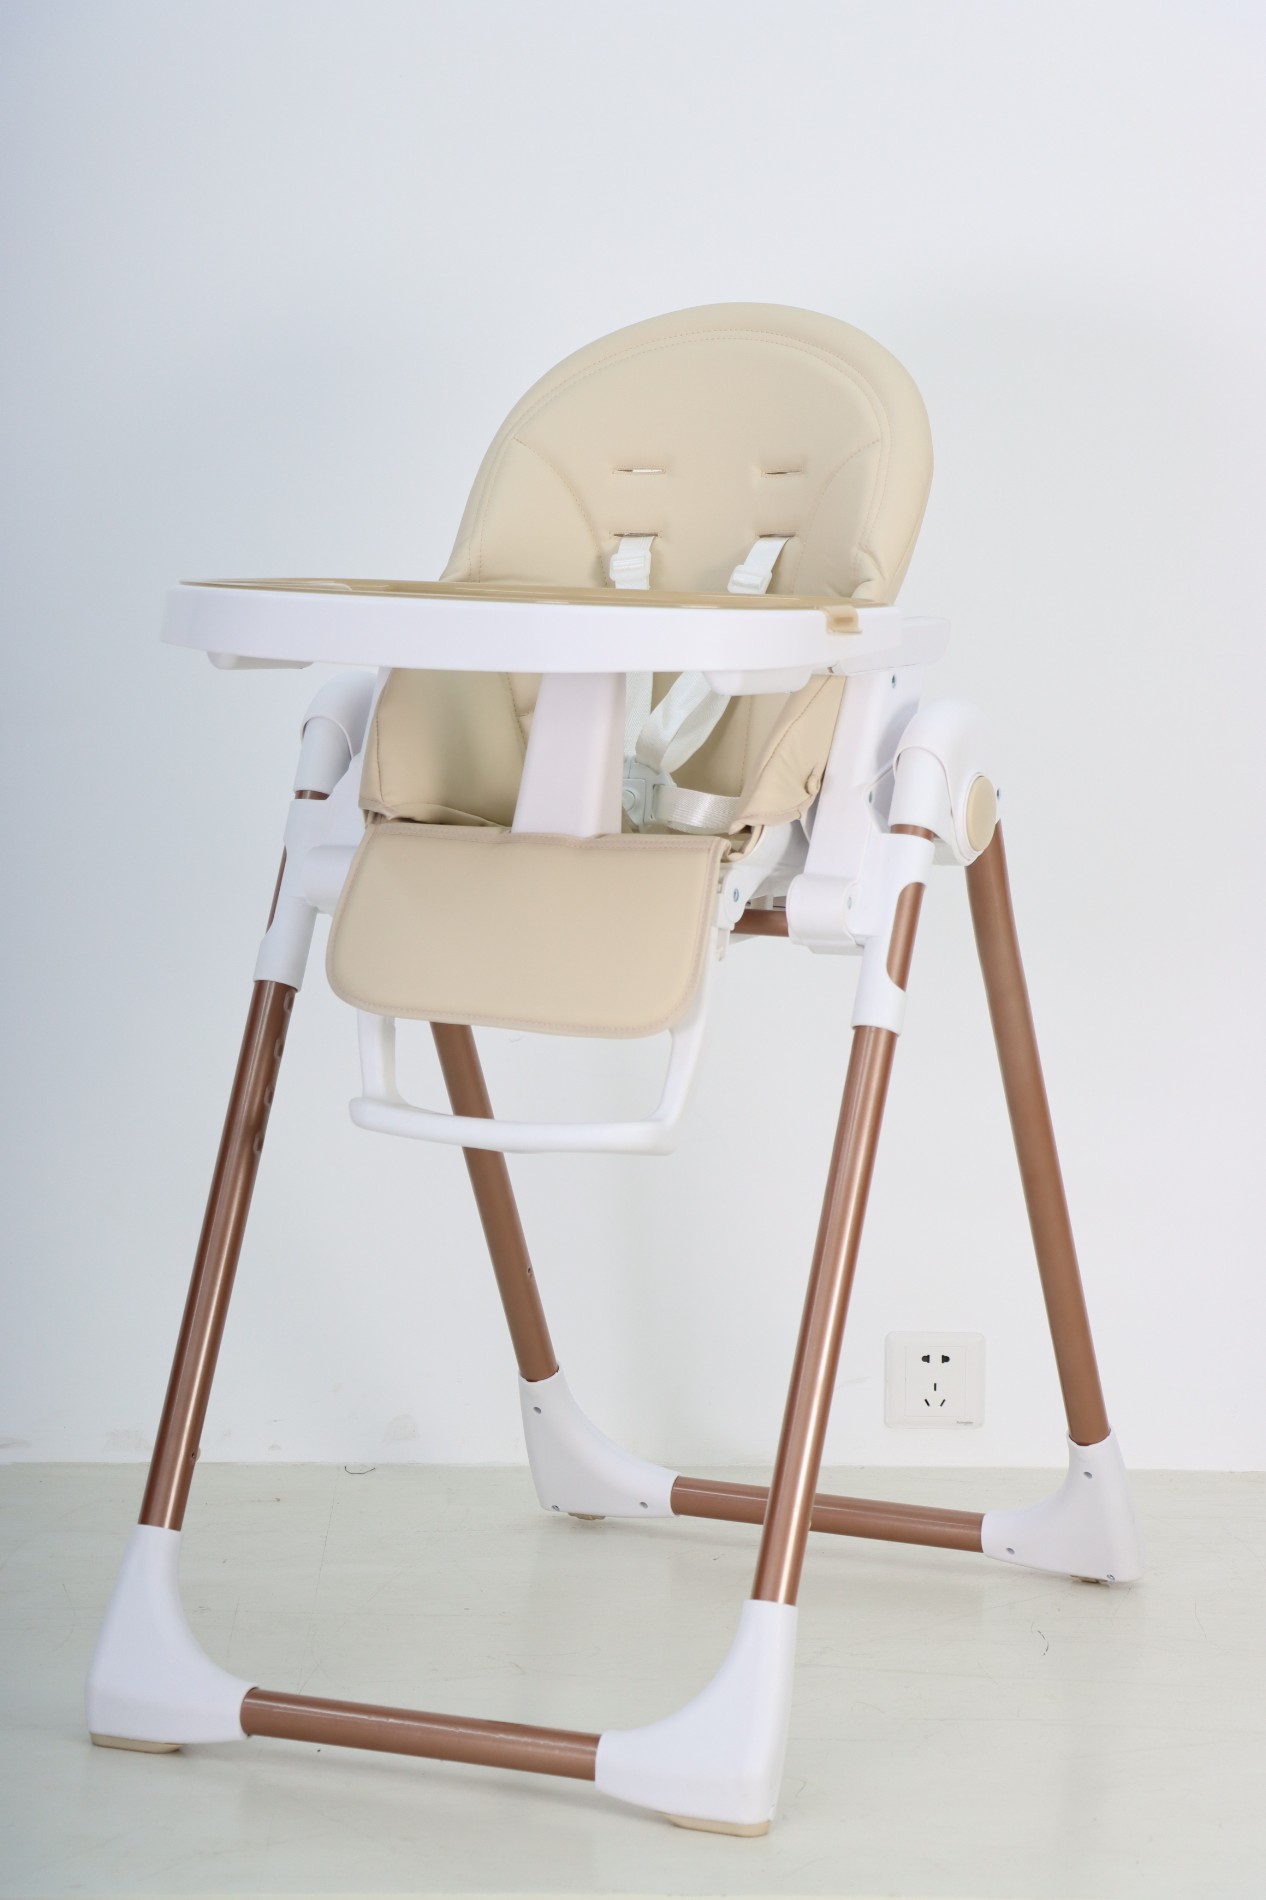 Restaurant Detachable 4 In 1 Double Tray baby booster dining high chair baby feeding food catcher